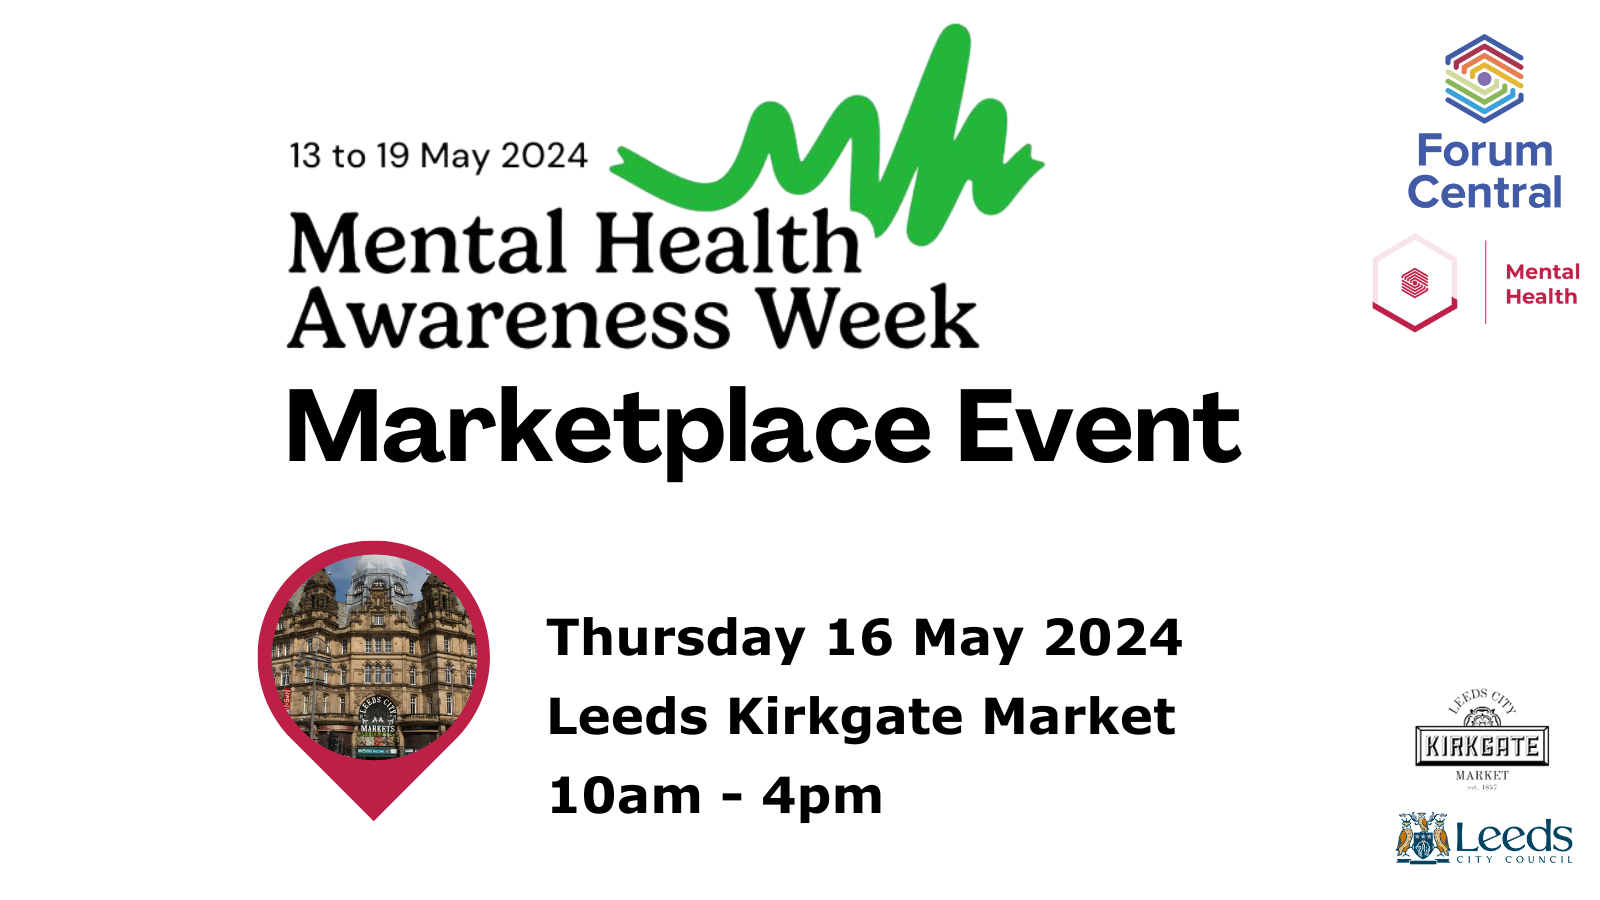 graphic for the mental health awareness week marketplace event. Thursday 16 May 2024, Leeds Kirkgate Market, 10 AM to 4 PM